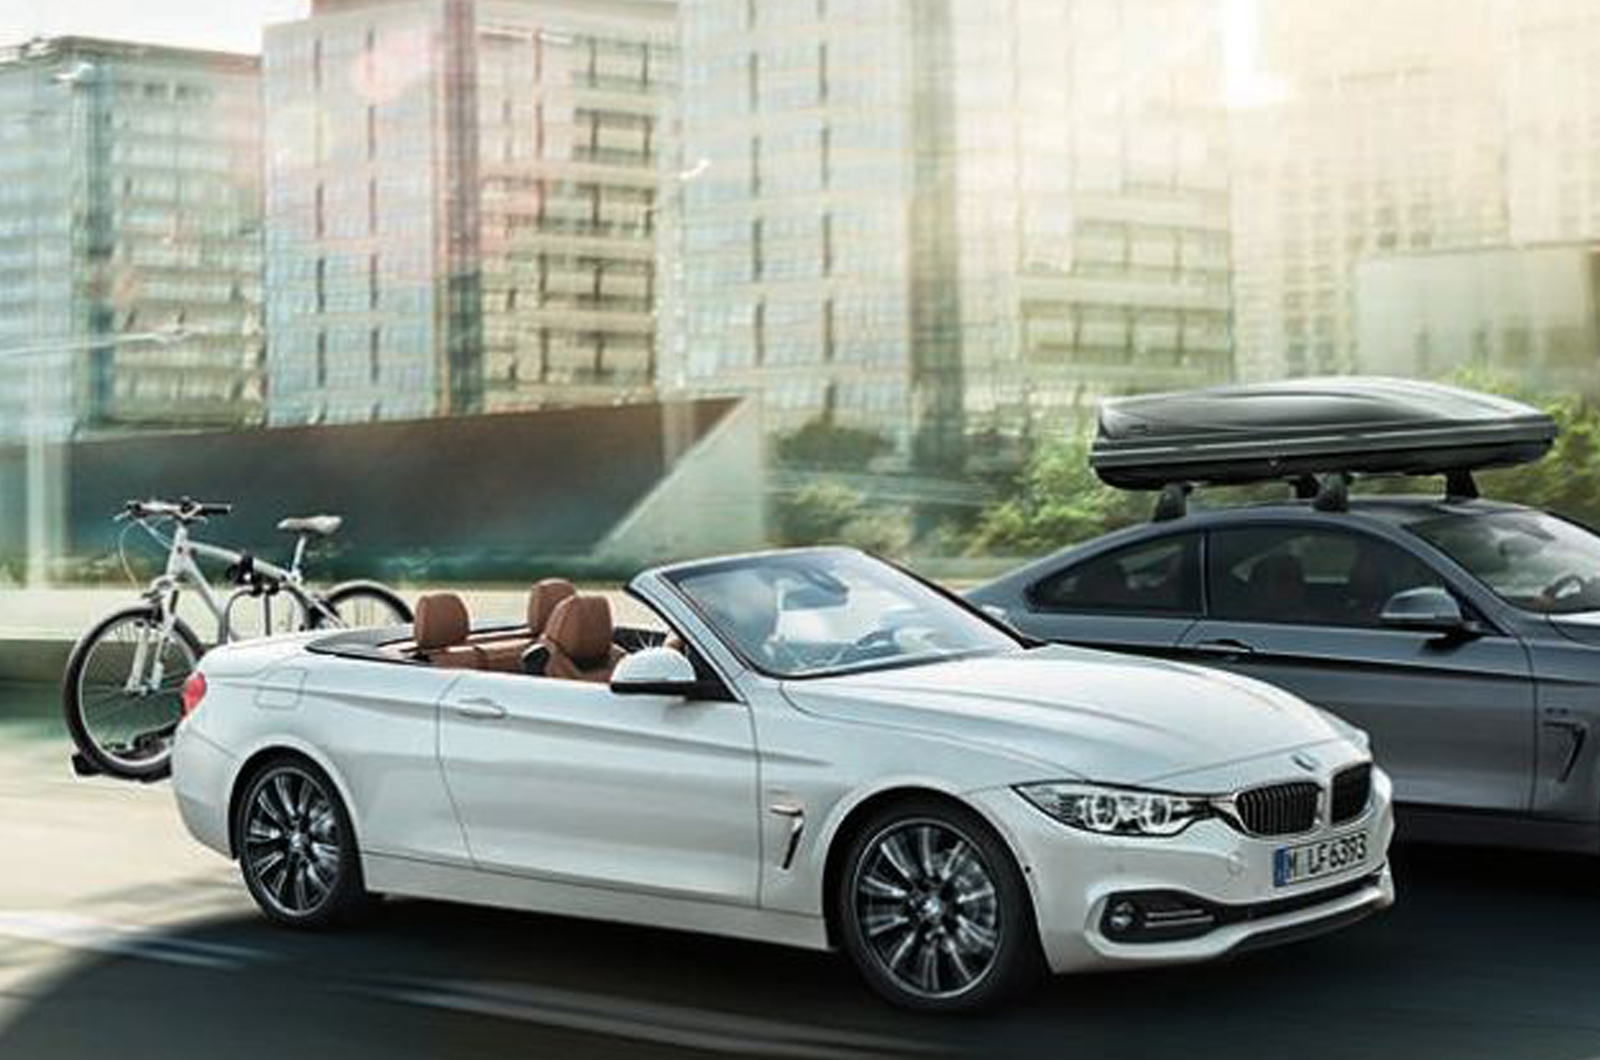 BMW 4 Series Cabrio Pics, Vehicles Collection